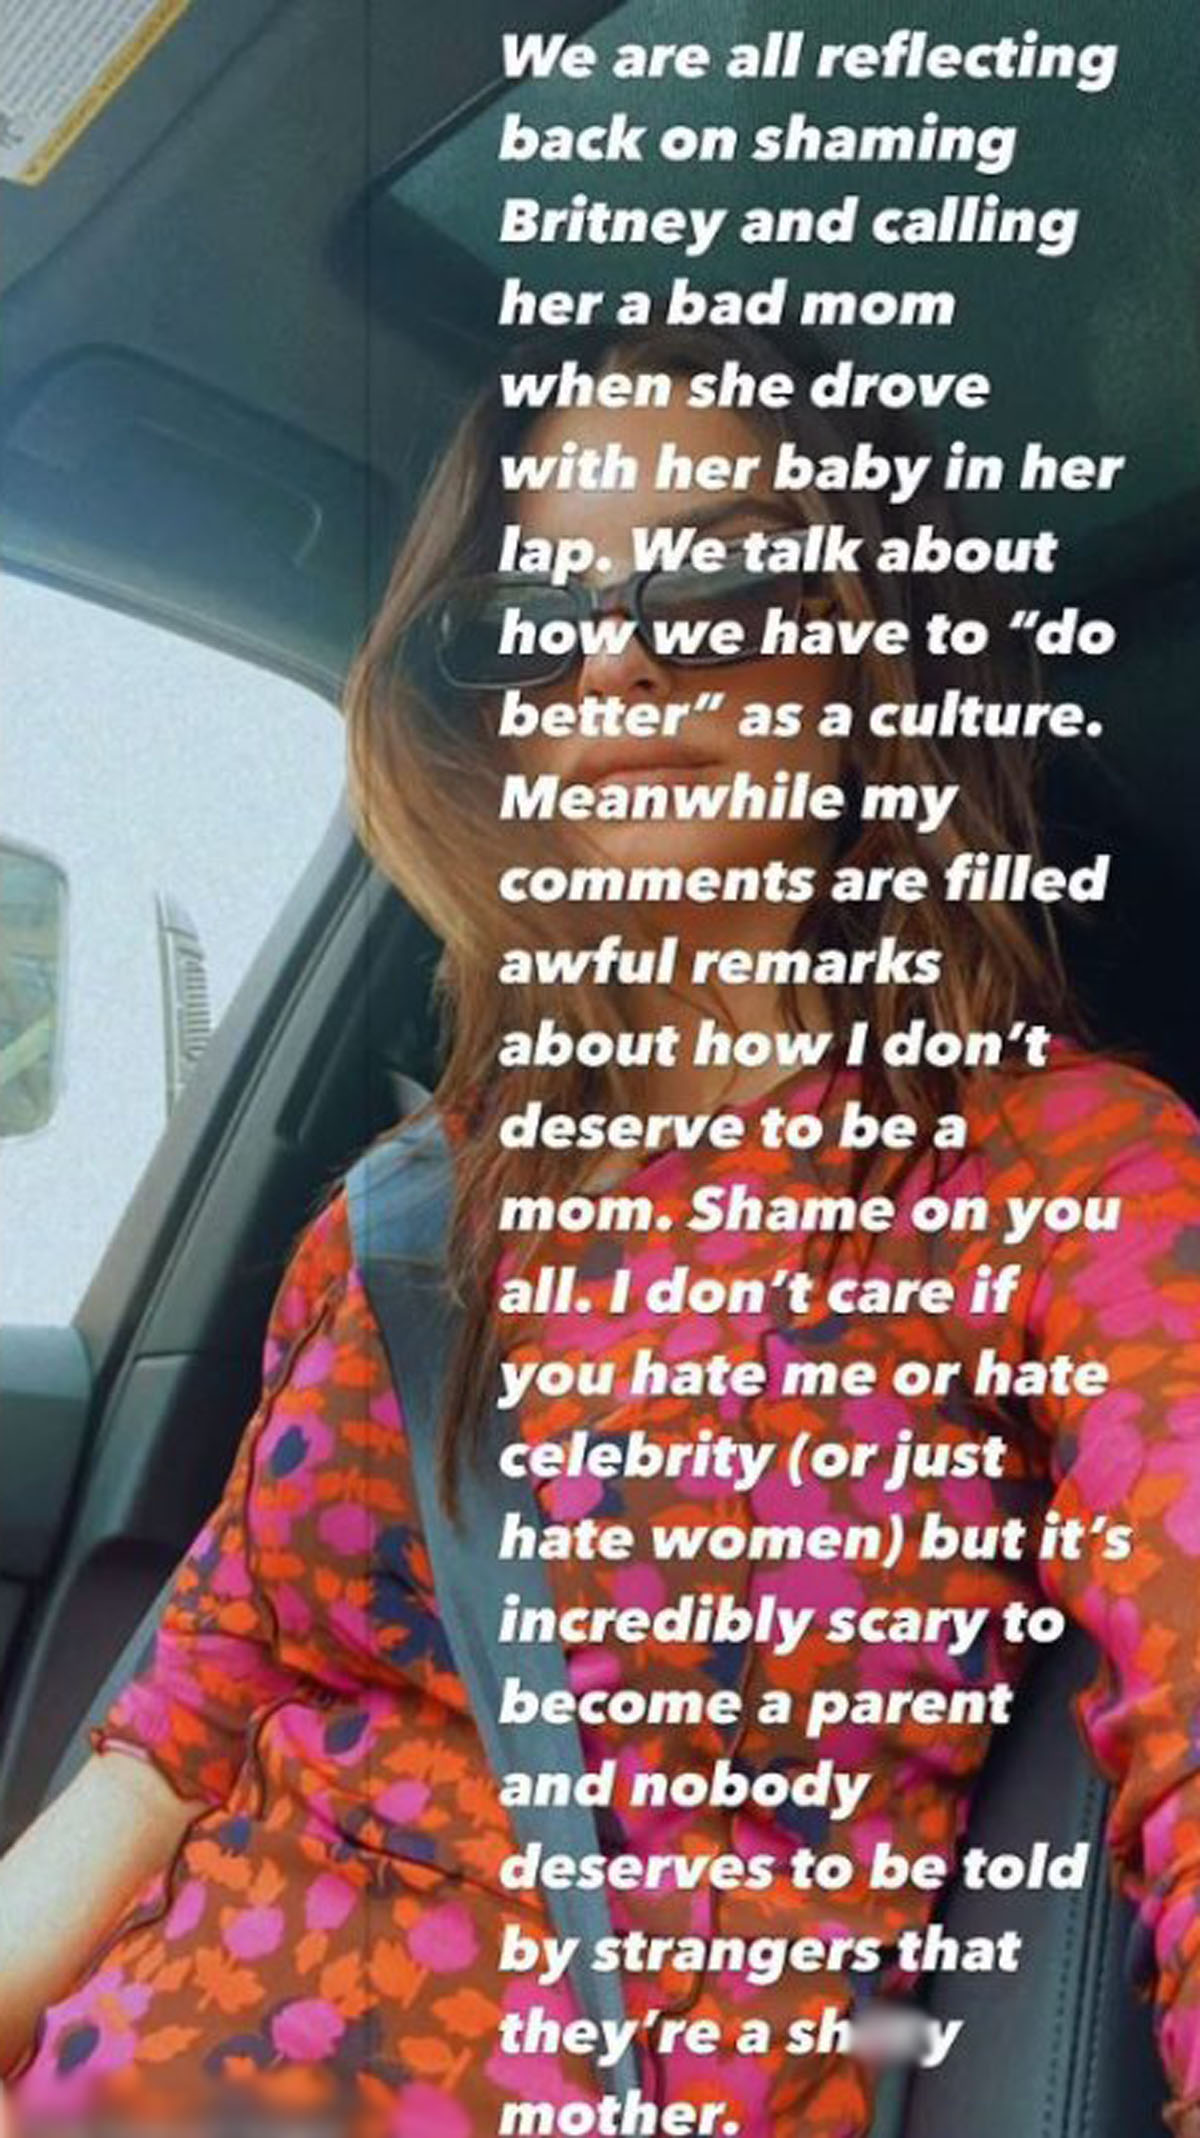 Emily Ratajkowski Slams Trolls For Phoning Her A ’S**tty Mom’ & Compares Her Situation To Britney Spears! 